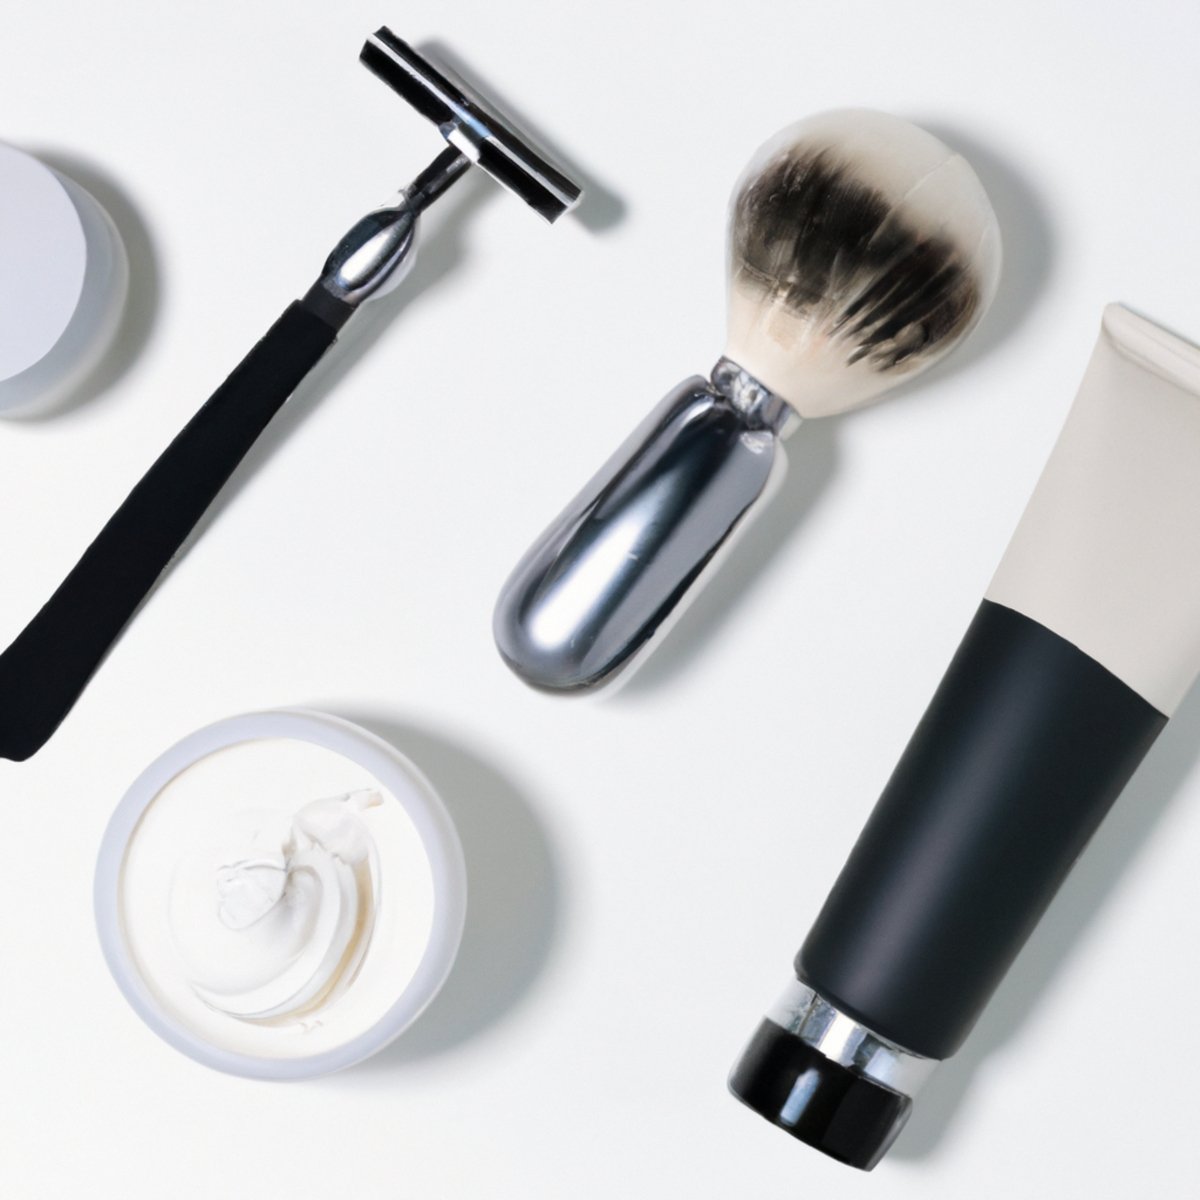 Upgrade your grooming game with these sleek and modern men's skin care essentials. From facial cleanser to shaving cream, these natural skin care routines will have you looking and feeling your best.